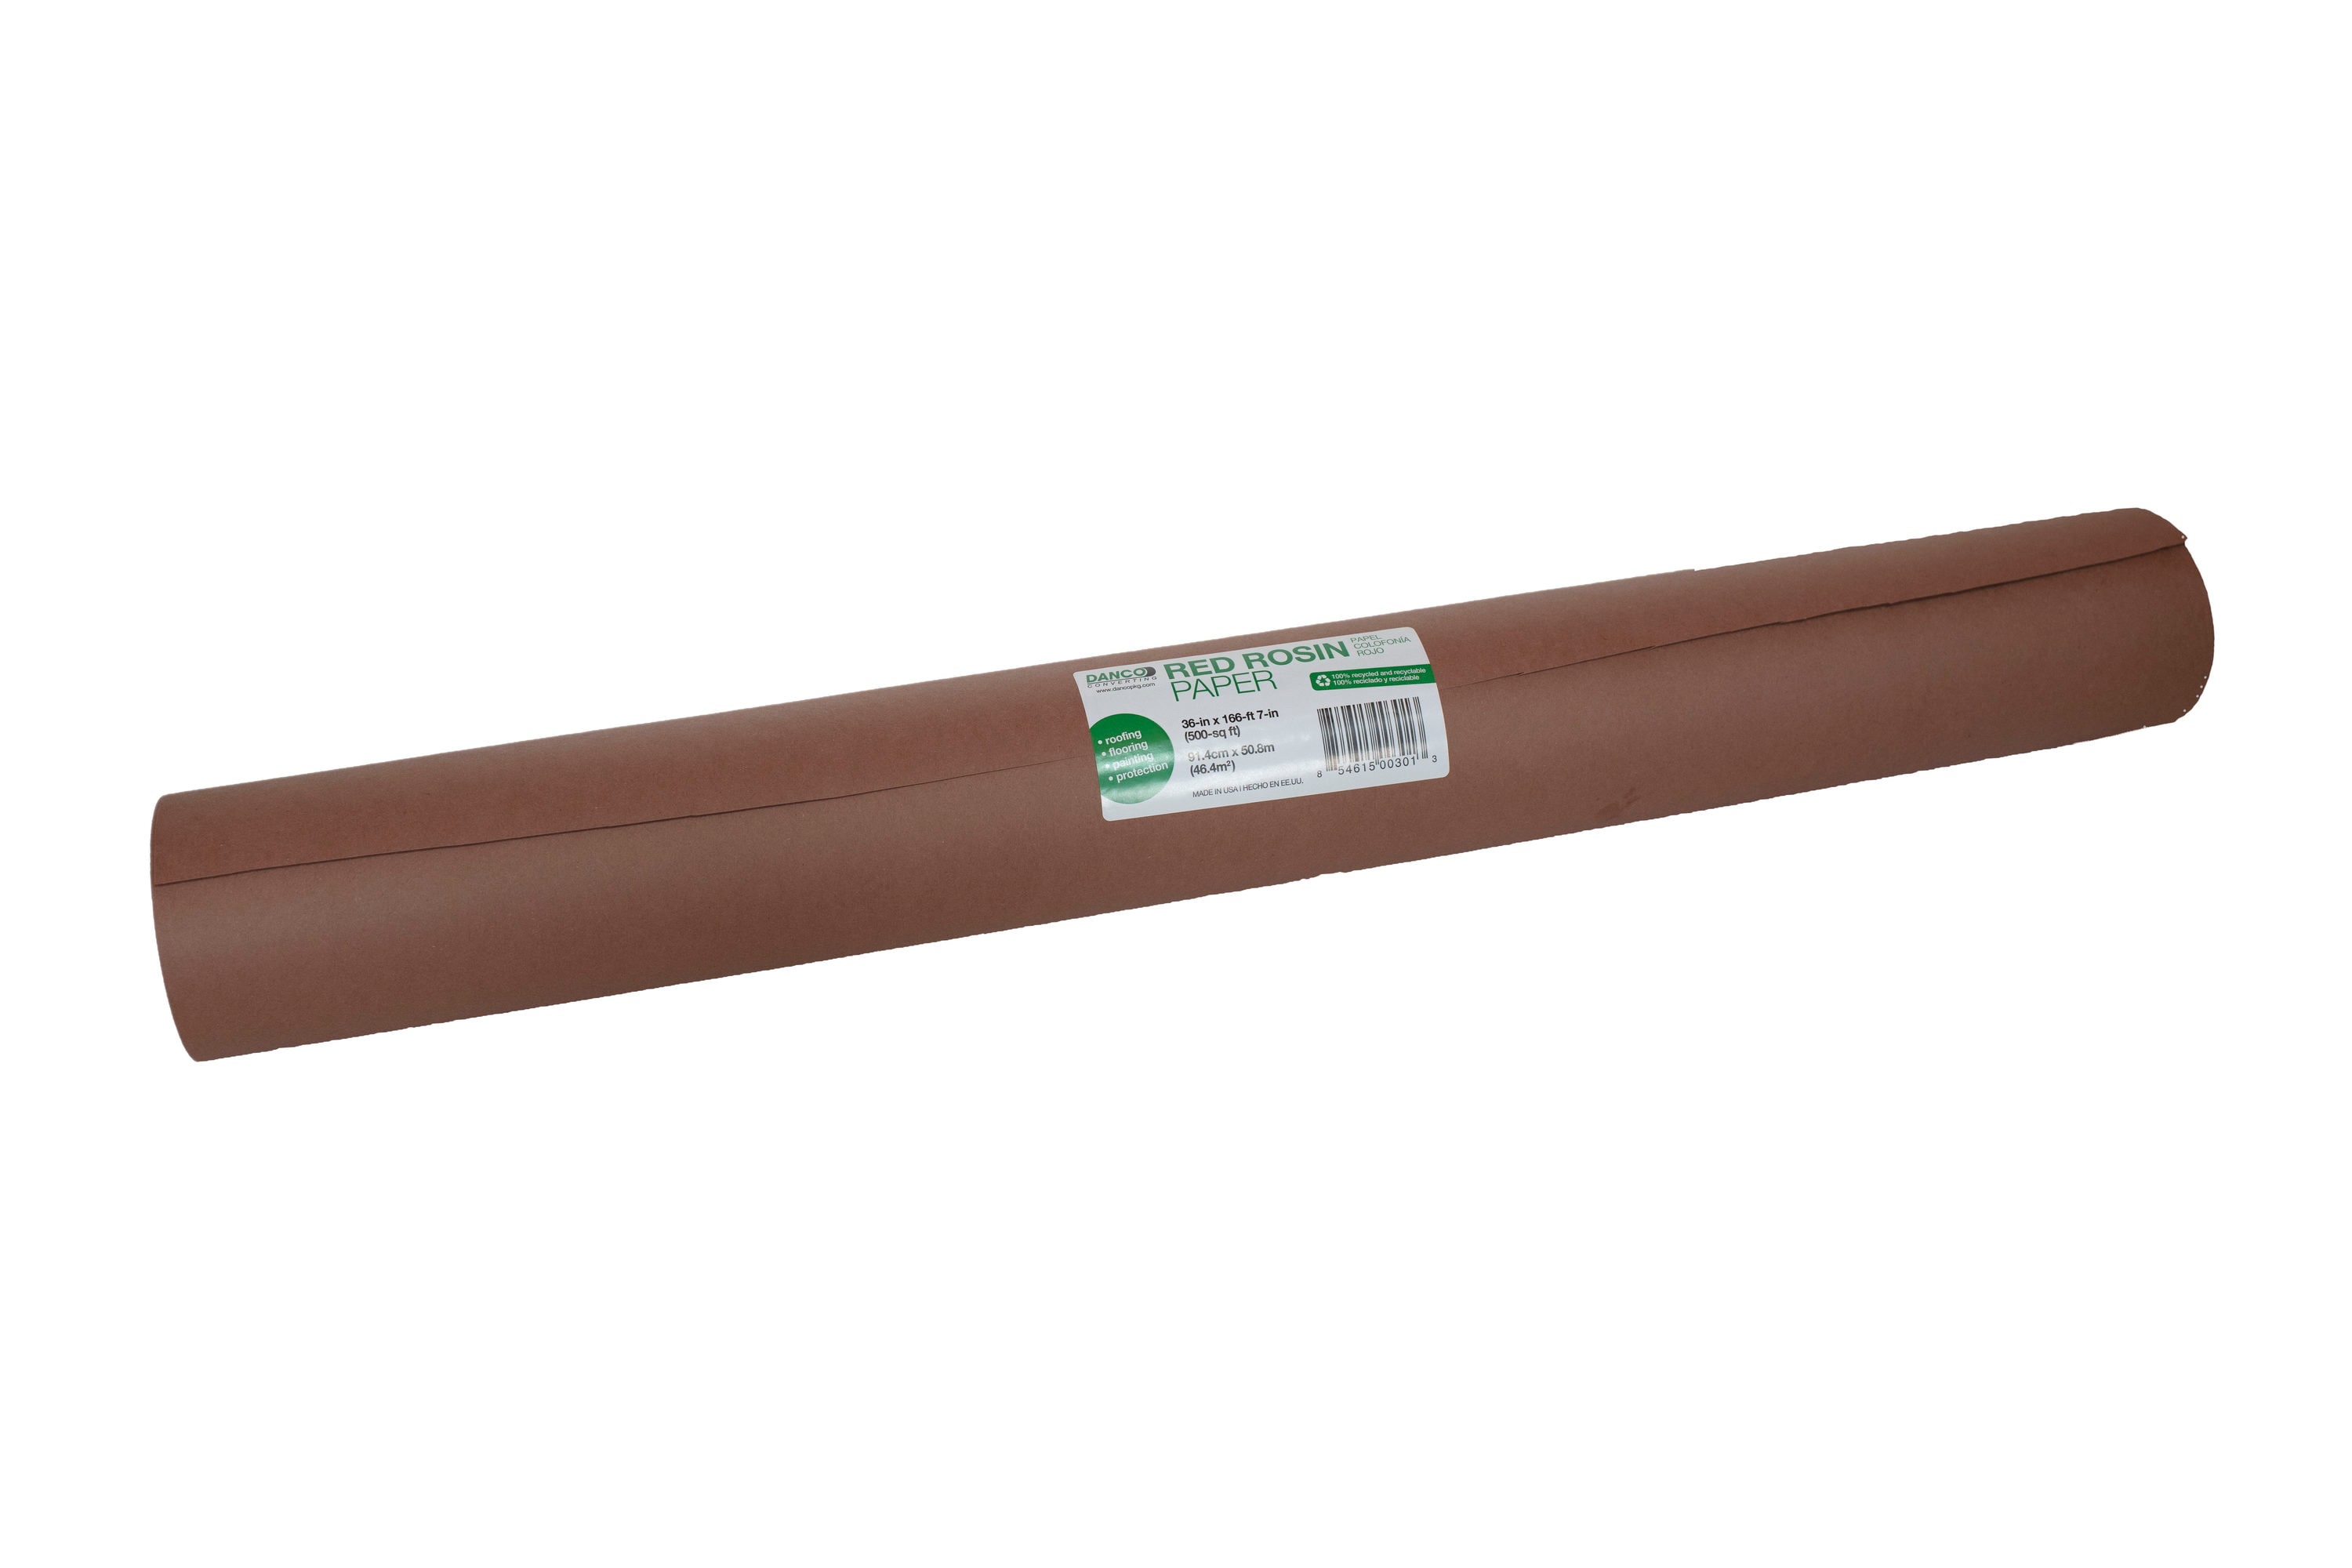 Wood Floors Plus > Underlayments > Red Rosin Paper 36 inch x 140 ft roll  420 sf/roll